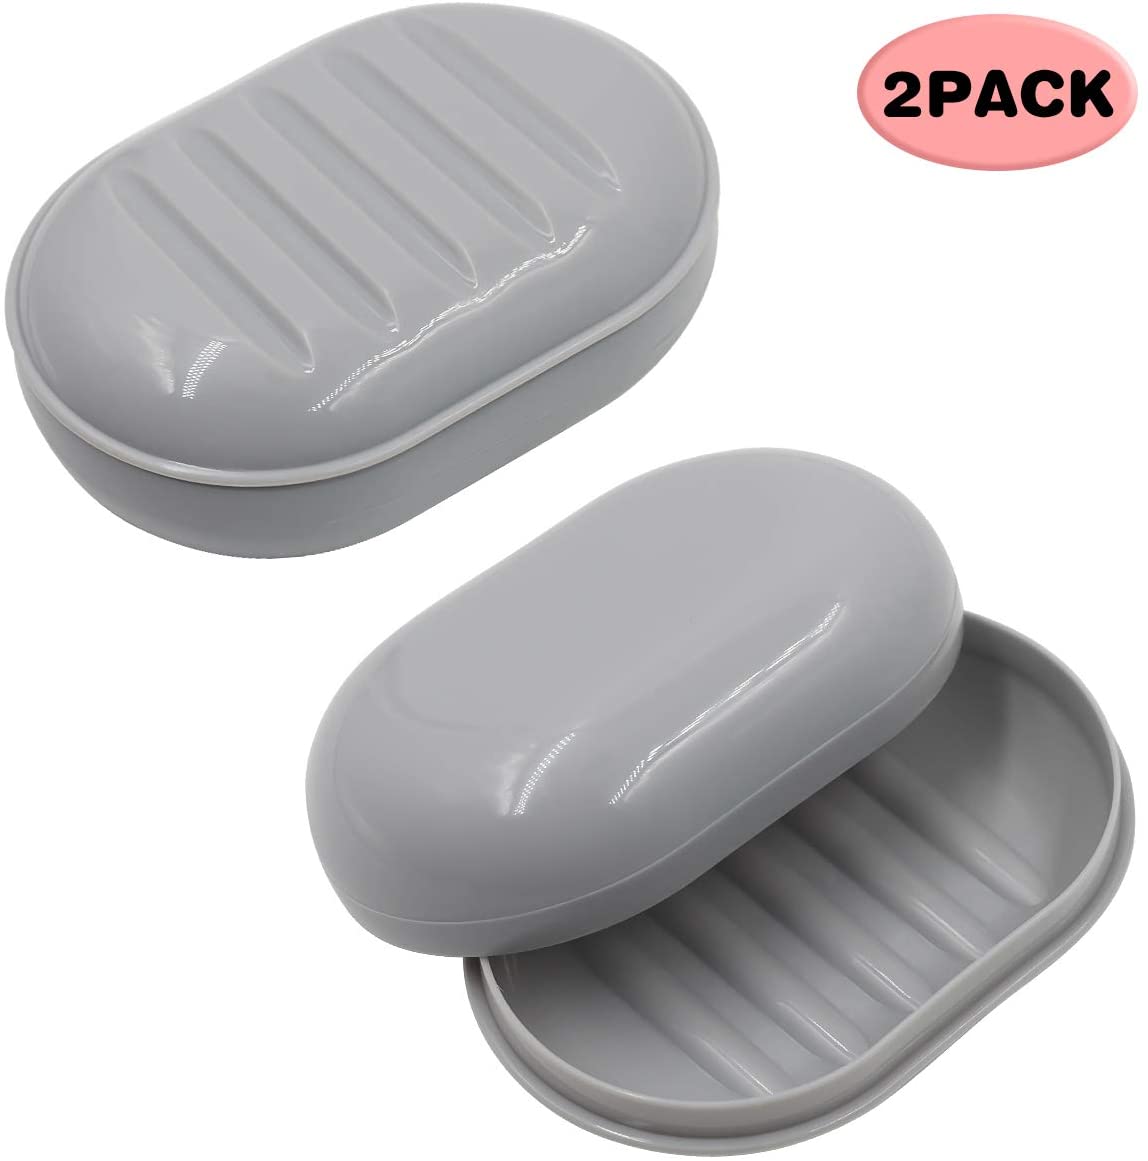 Topsky 2 Pcs Soap Dish for Shower, Soap Dishes Soap Savers for Bar Soap,  Soap Bar Holder Shower with Drip Tray, Plastic Double Layer Draining Soap  Box